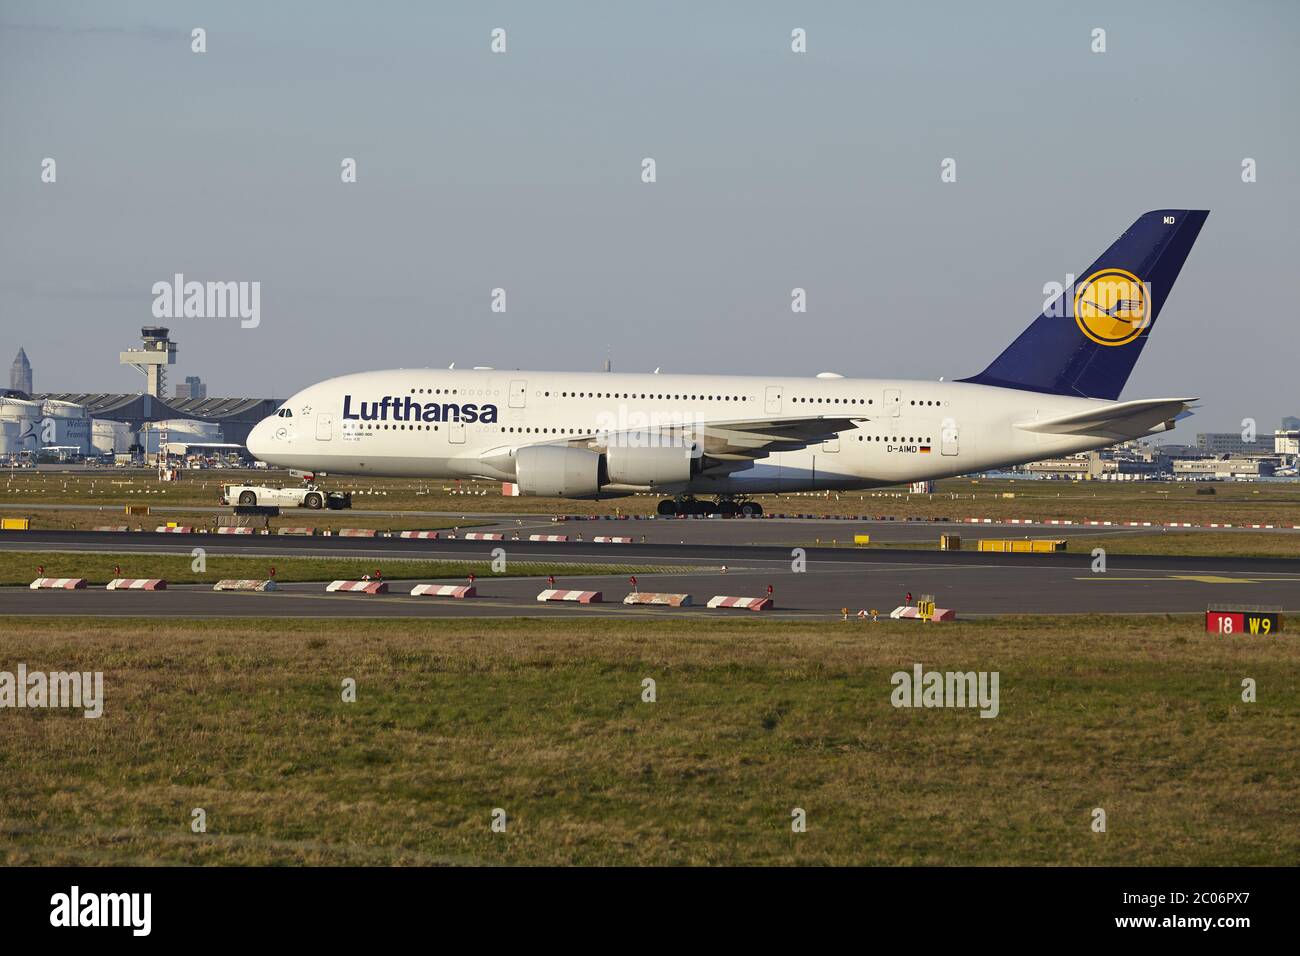 Frankfurt Airport - Launch of an Airbus A380-800 from Lufthansa Stock Photo